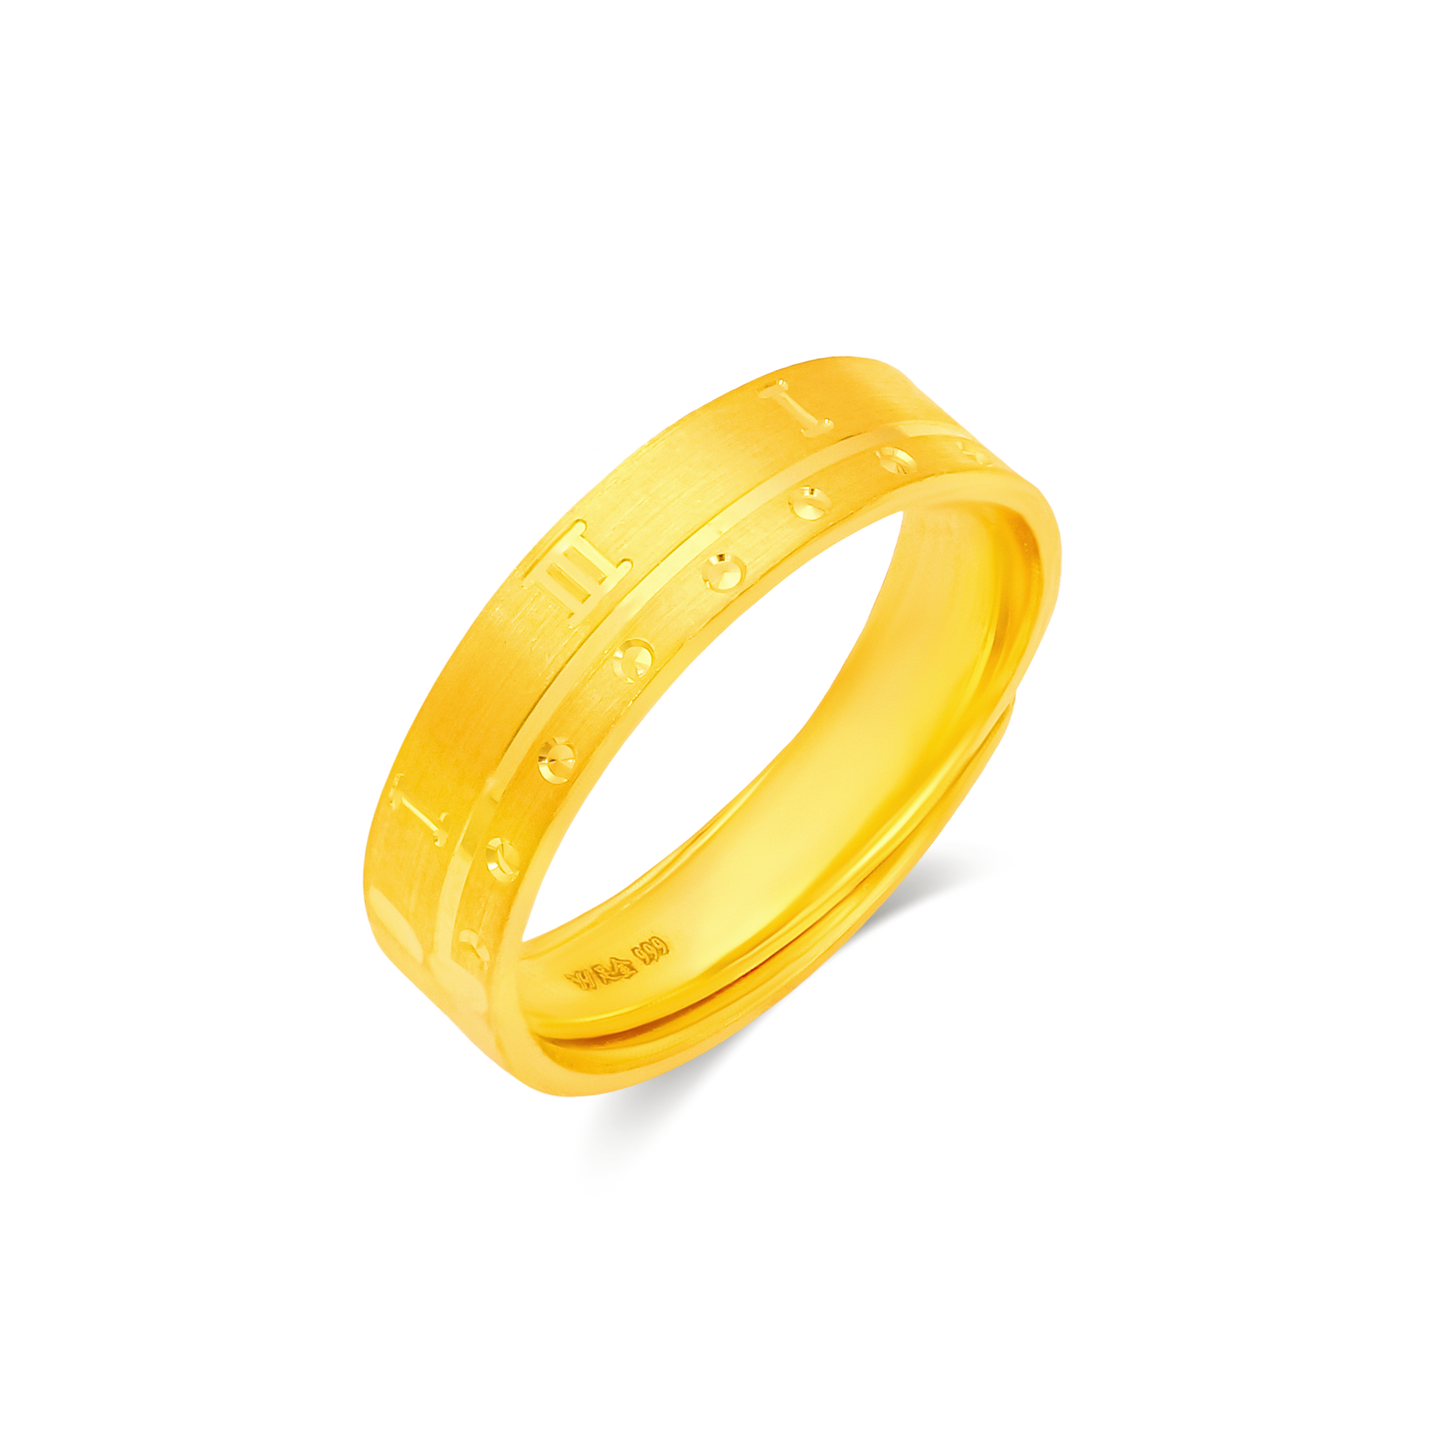 TAKA Jewellery 999 Pure Gold Ring Roman Numeral